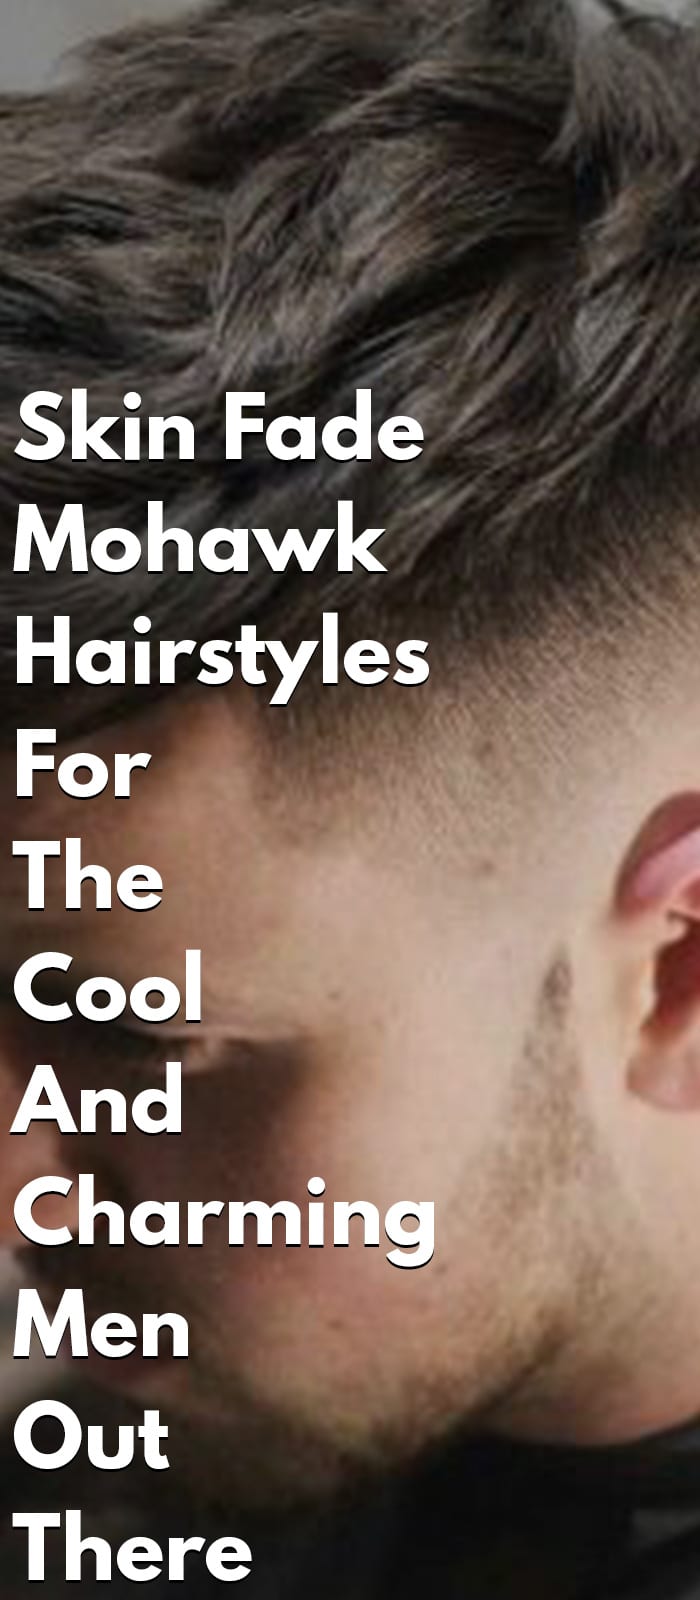 Skin Fade Mohawk Hairstyles For The Cool And Charming Men Out There